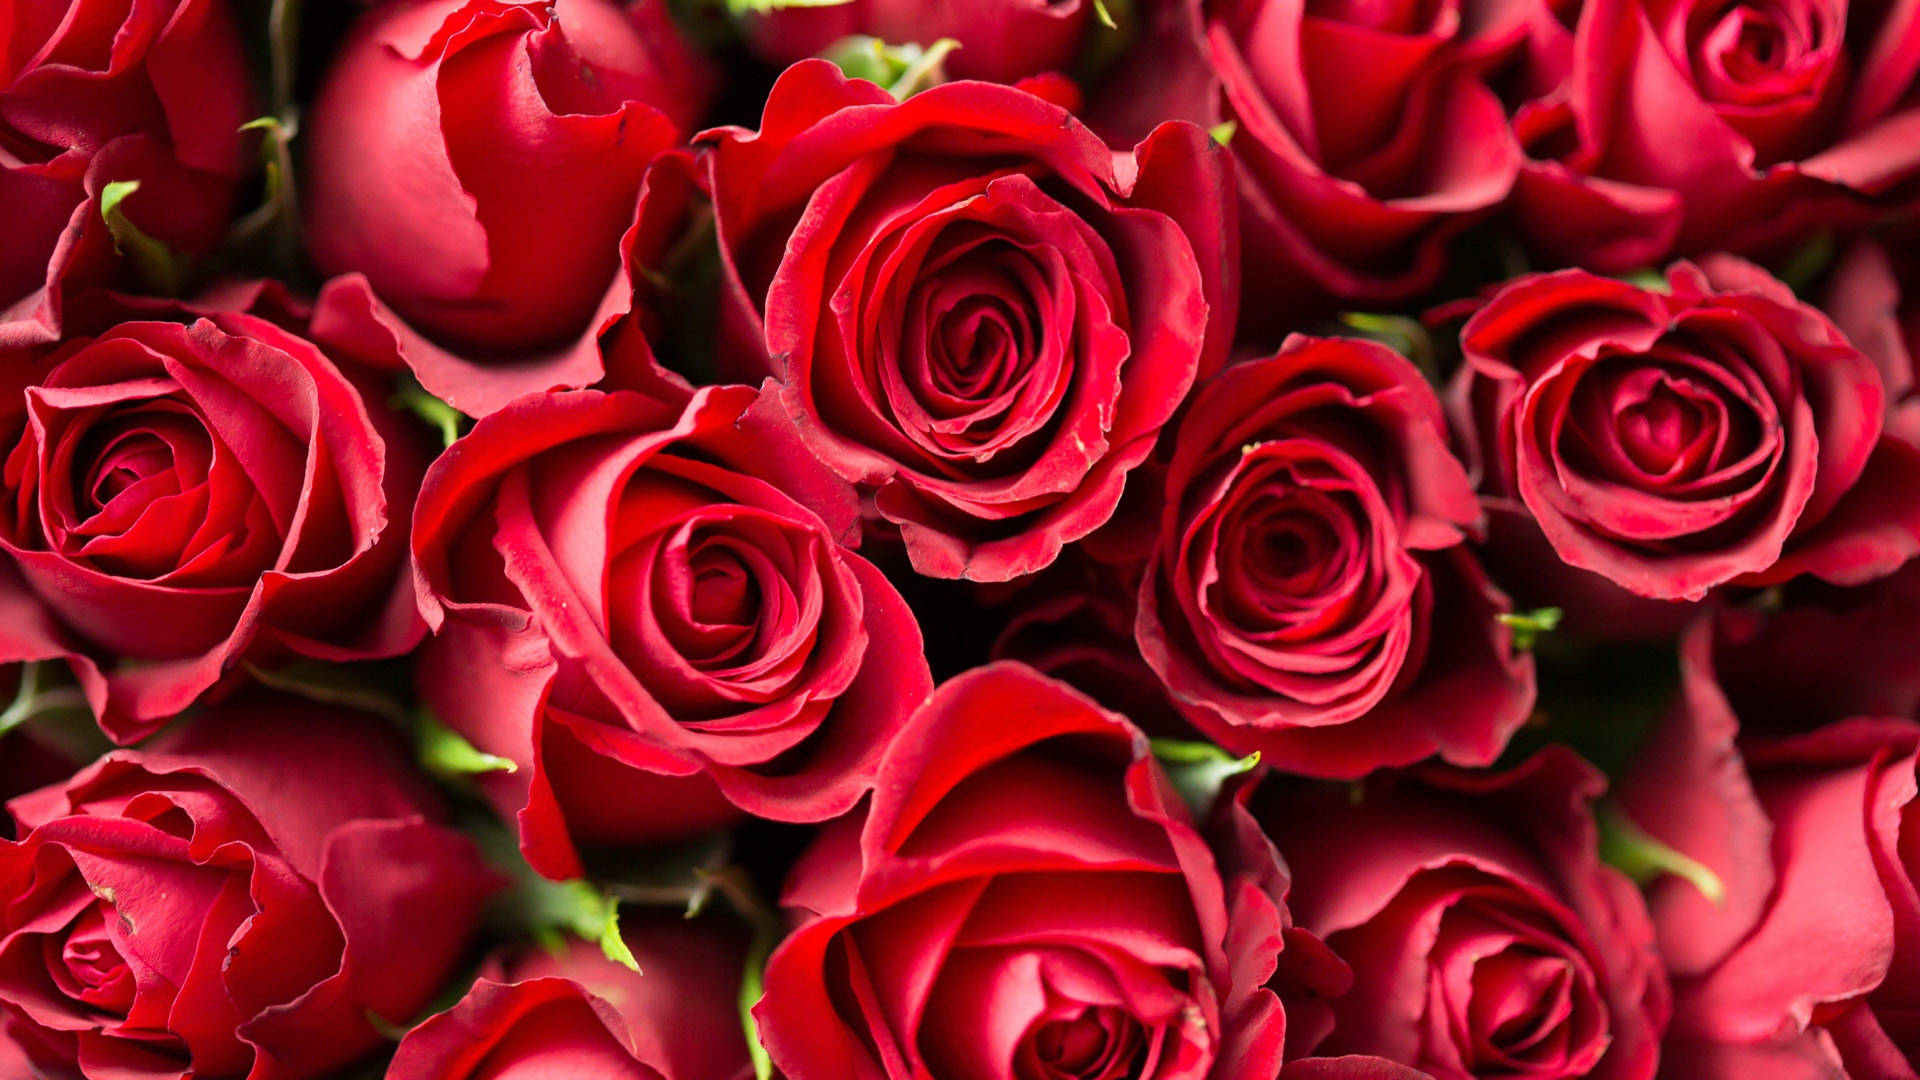 4K Bunch Of Red Roses Wallpaper